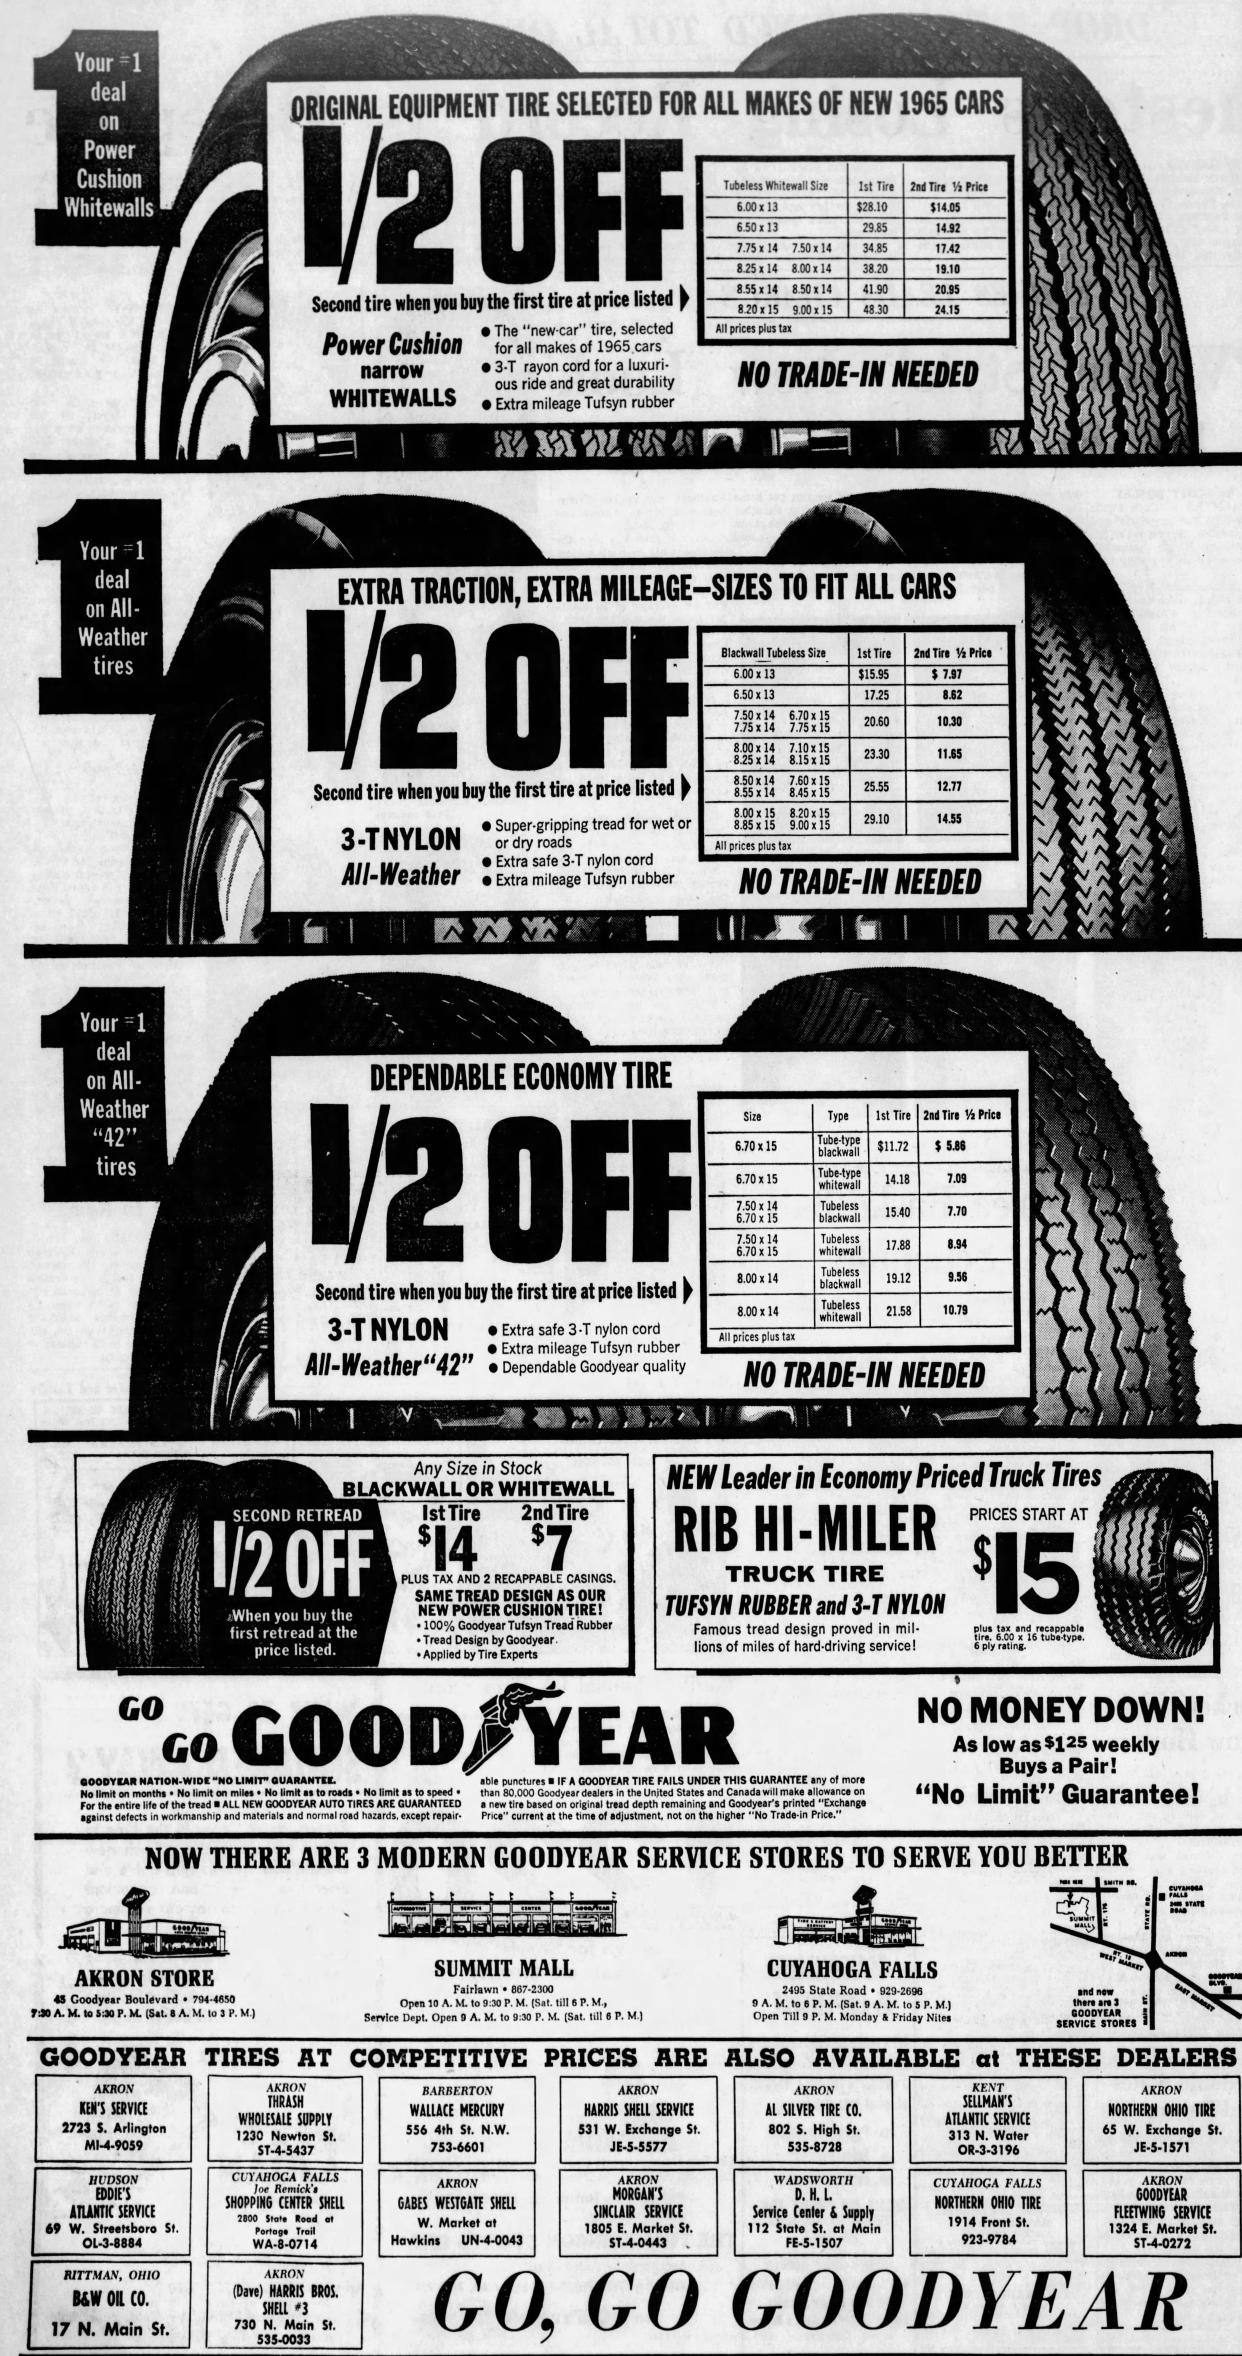 Goodyear Tire & Rubber Co. advertises new tires in 1966 in the Akron Beacon Journal.